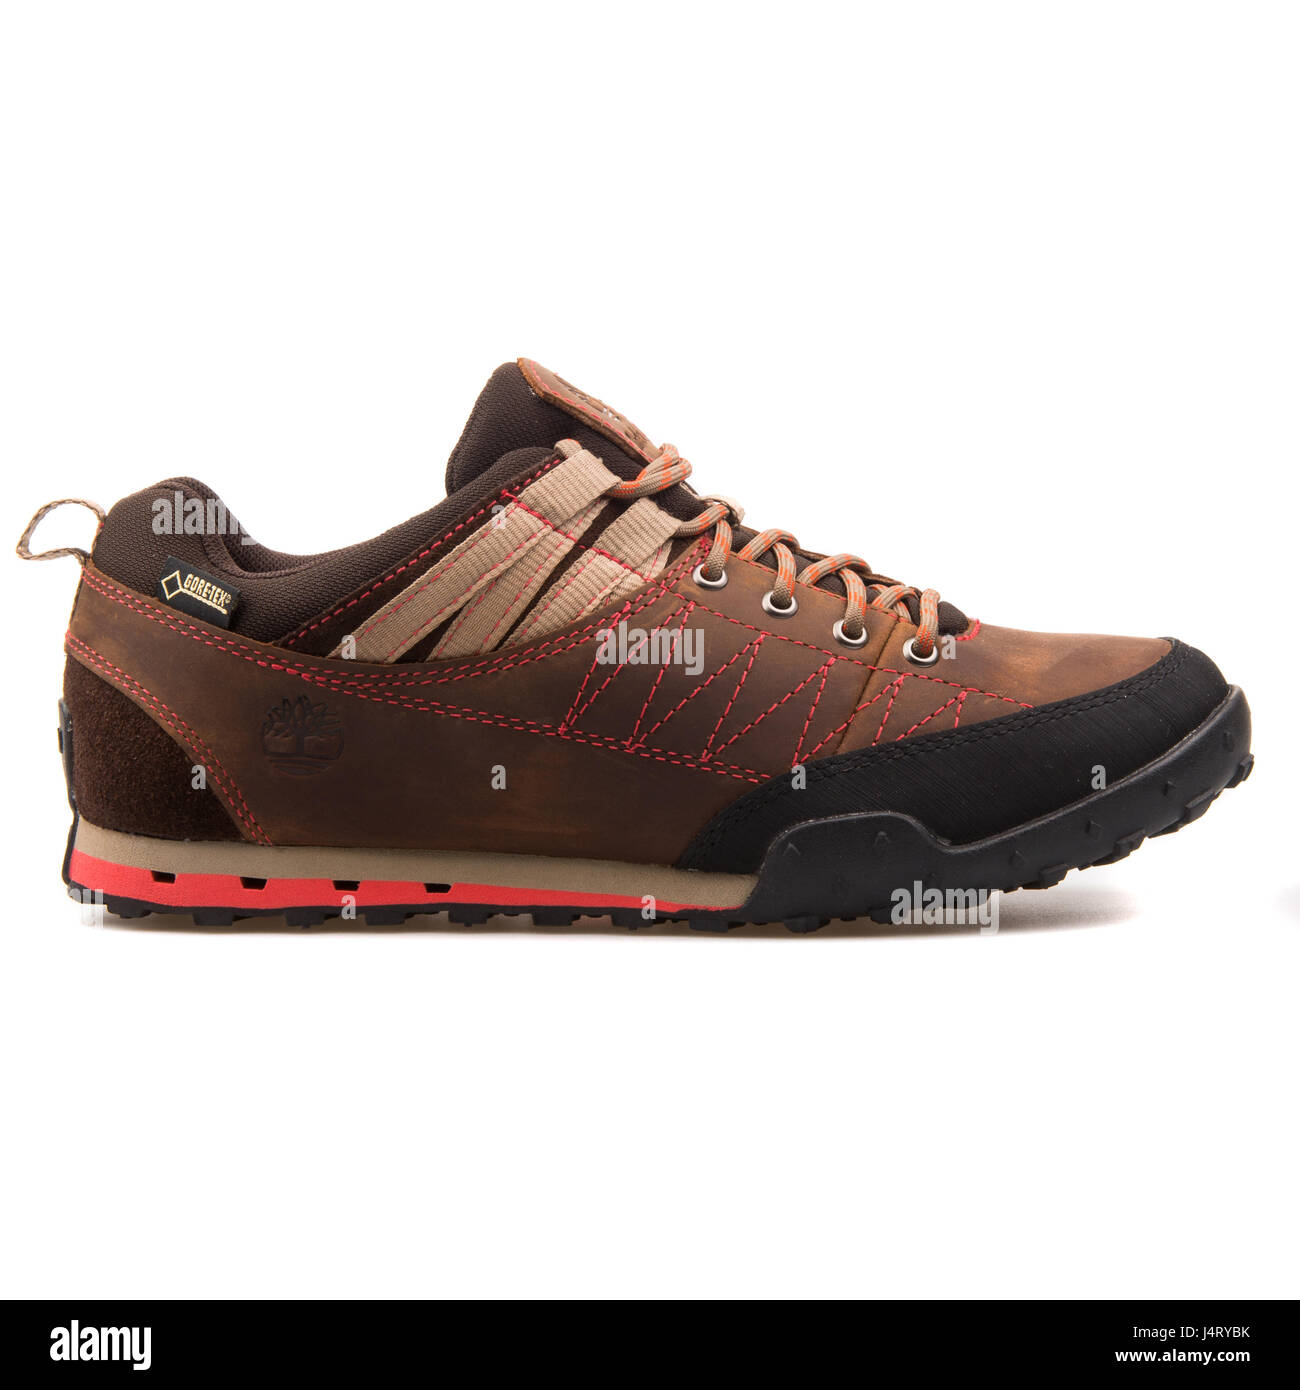 Timberland greeley approach low brown e imágenes de alta Alamy